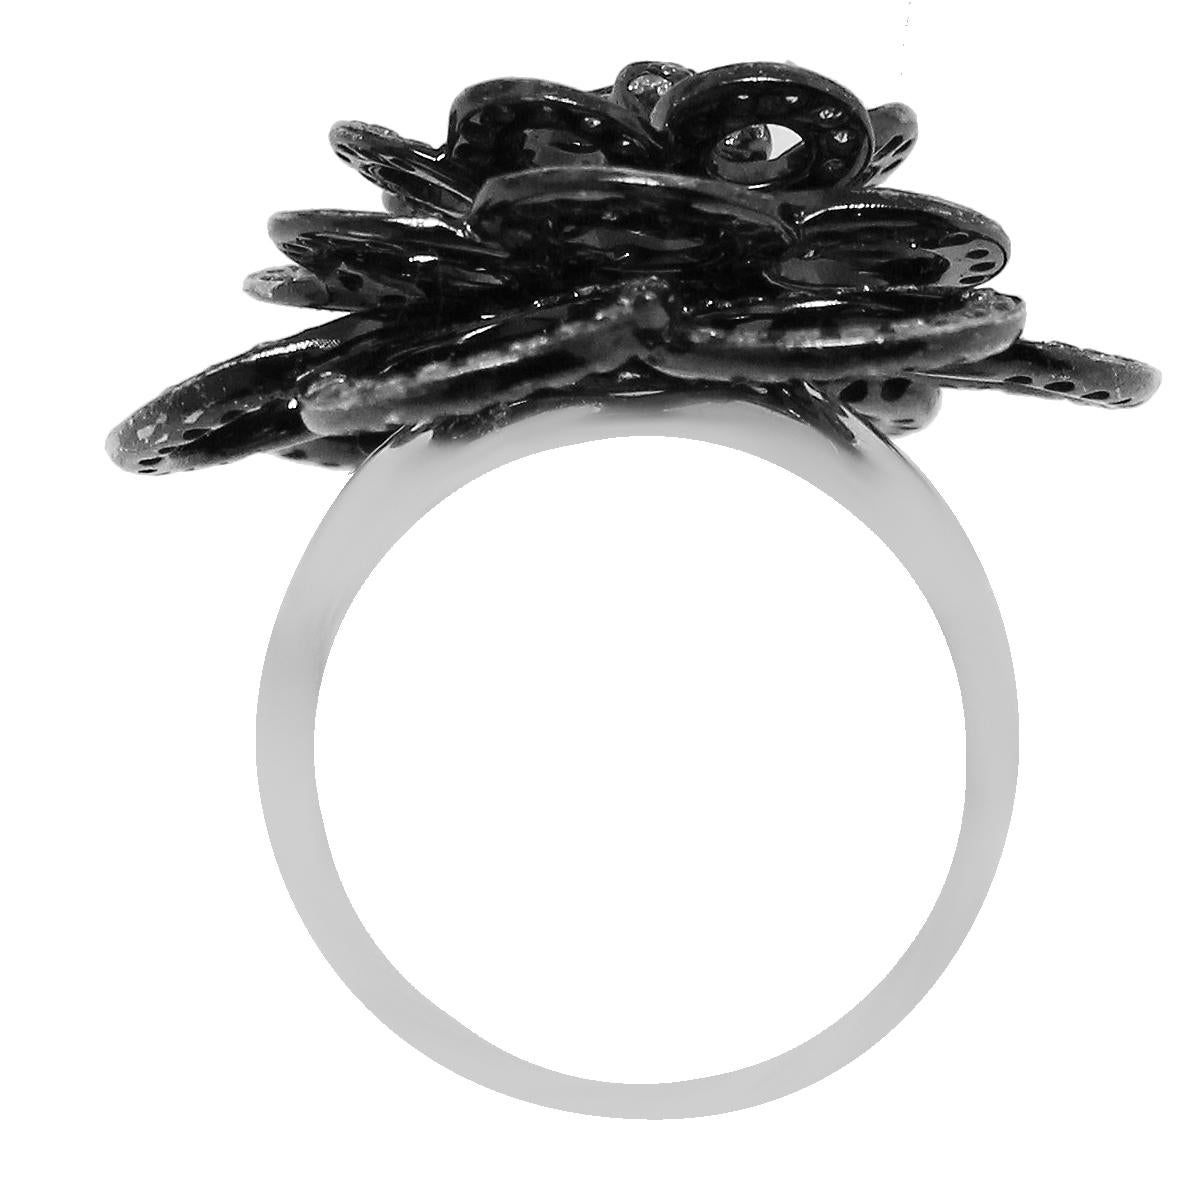 18k White Gold 2.70ctw Black Diamond Rose Ring
Material: 18k White Gold
Diamond Details: Approximately 2.70ctw black round diamonds. Diamonds are H/I in color and SI1 in clarity.
Ring Size: 6.75 (can be sized)
Total Weight: 10.3g